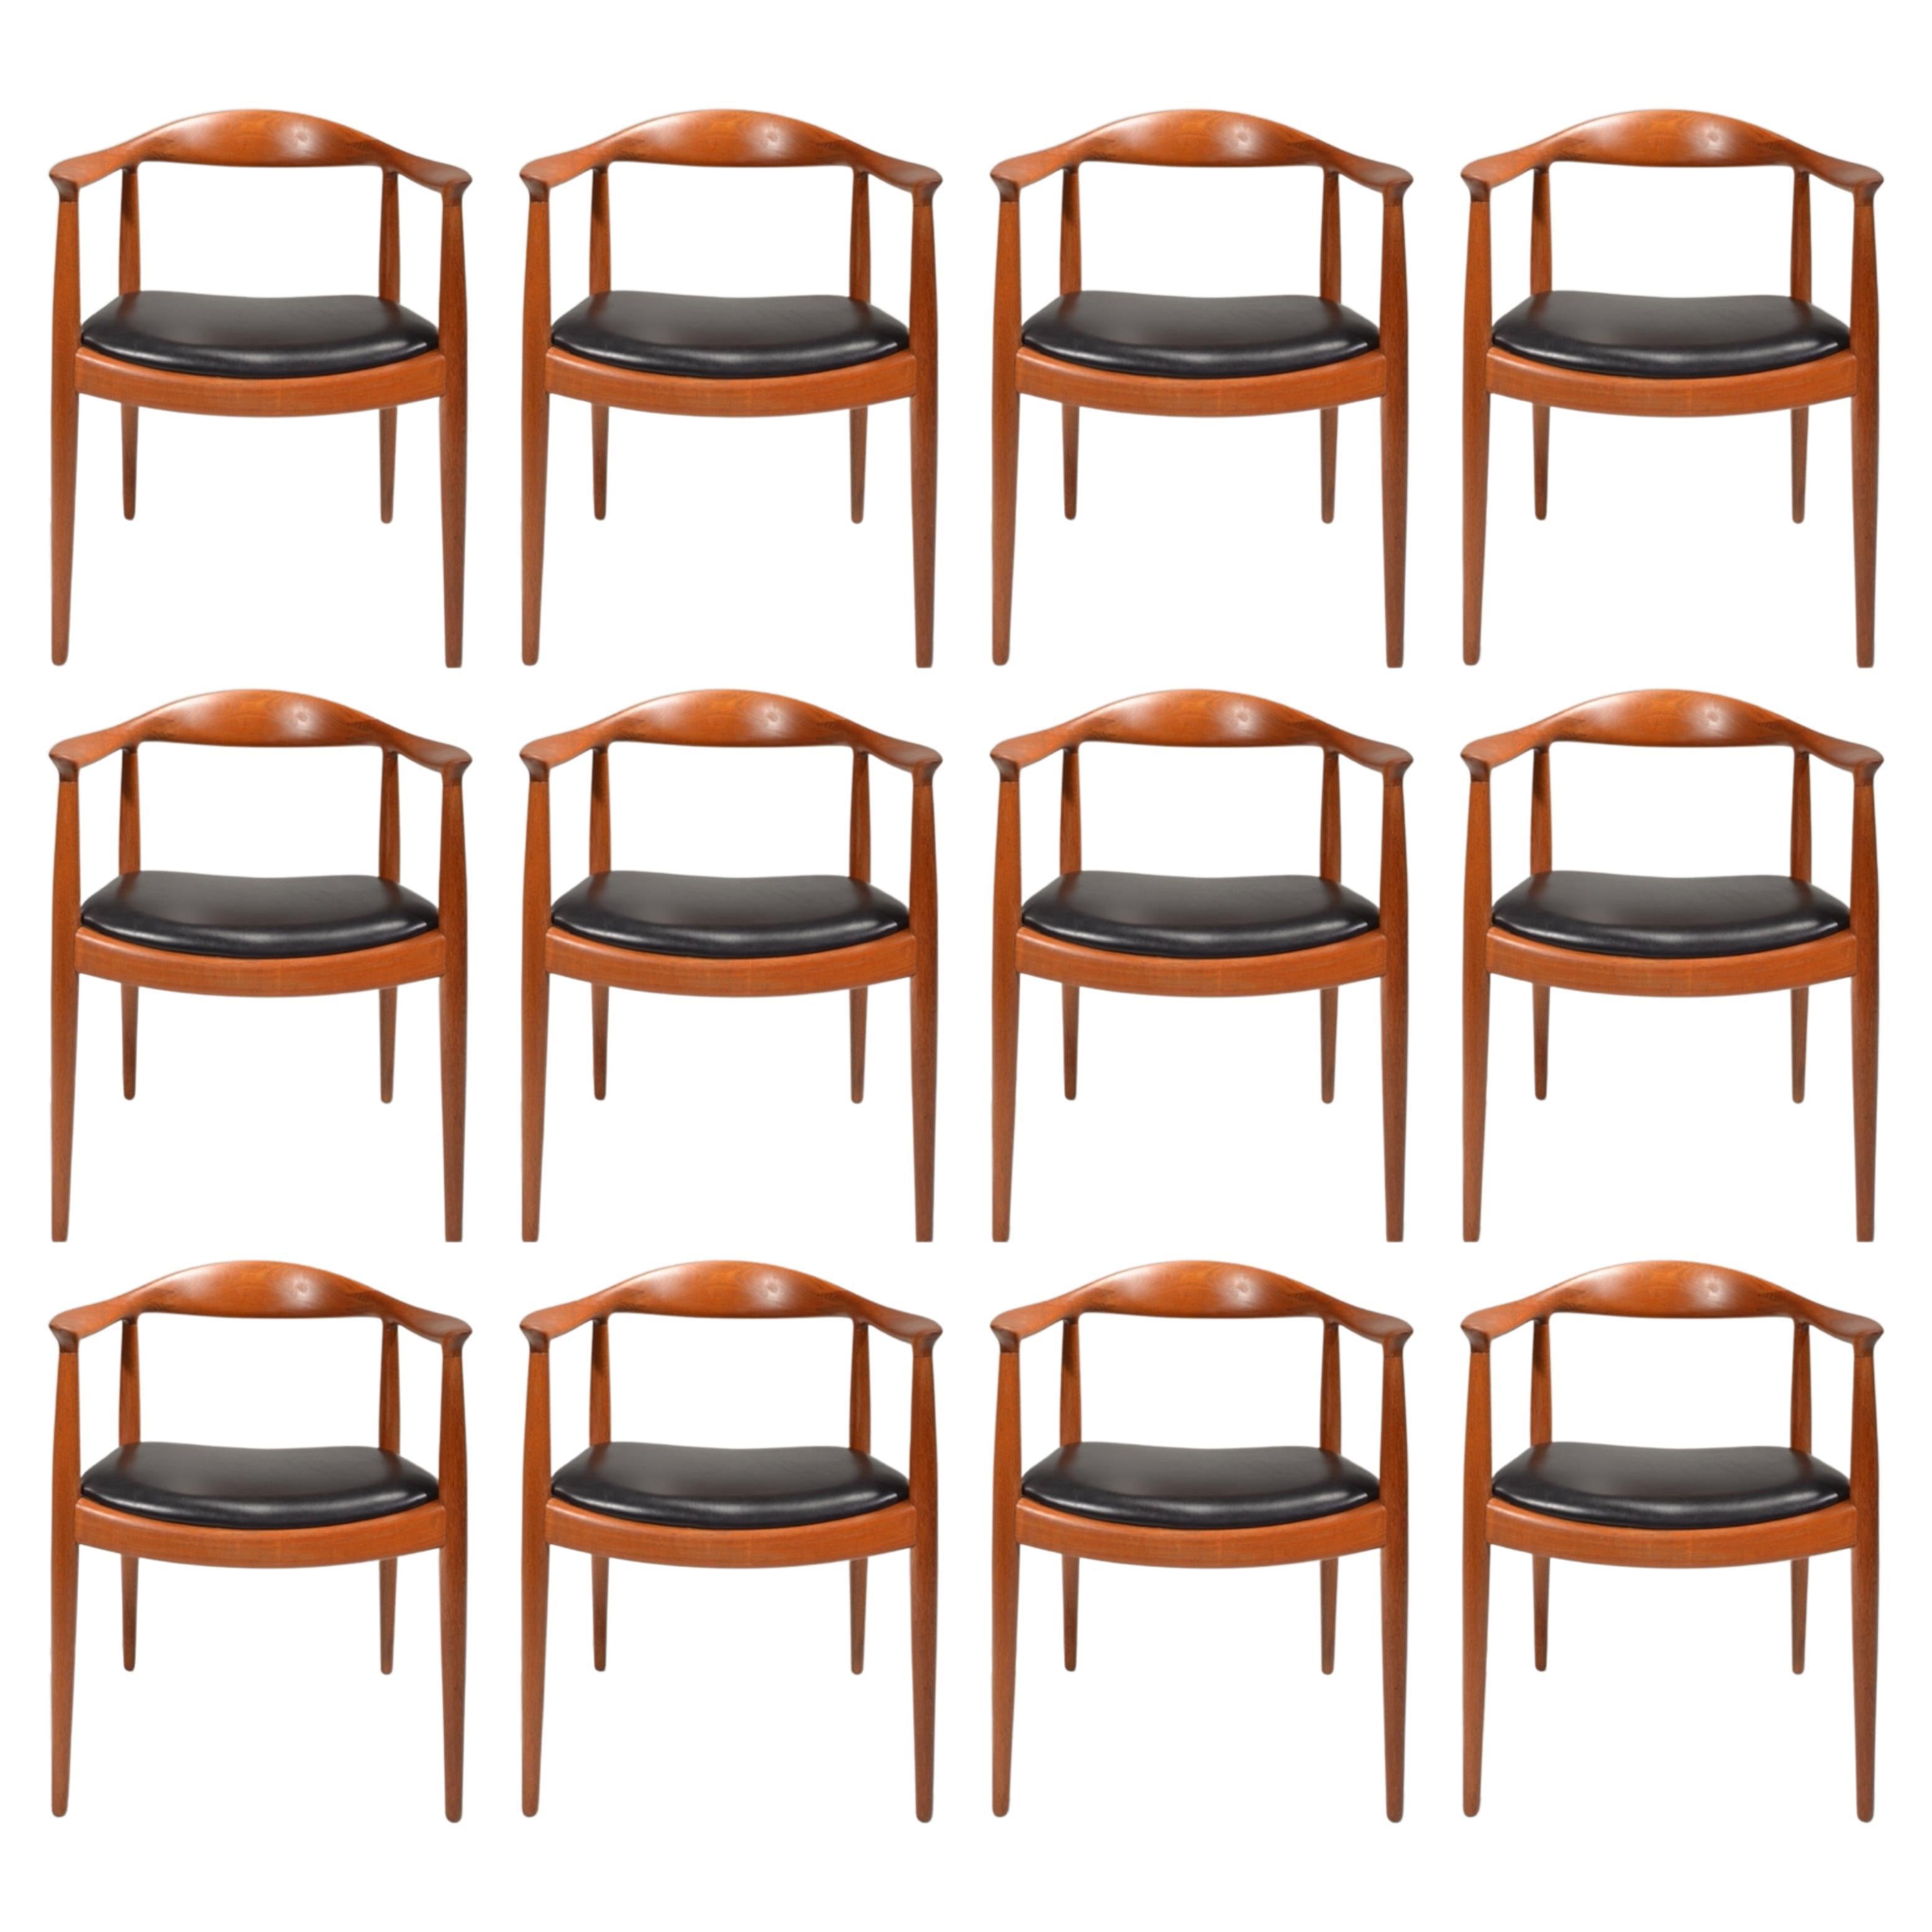 We are excited to offer 11 early Hans Wegner JH-503 chairs designed in 1949 and Produced by Johannes Hansen. Fully restored solid old growth teak construction. Stamped with the maker's mark. Currently we have 4 in black leather and one in white